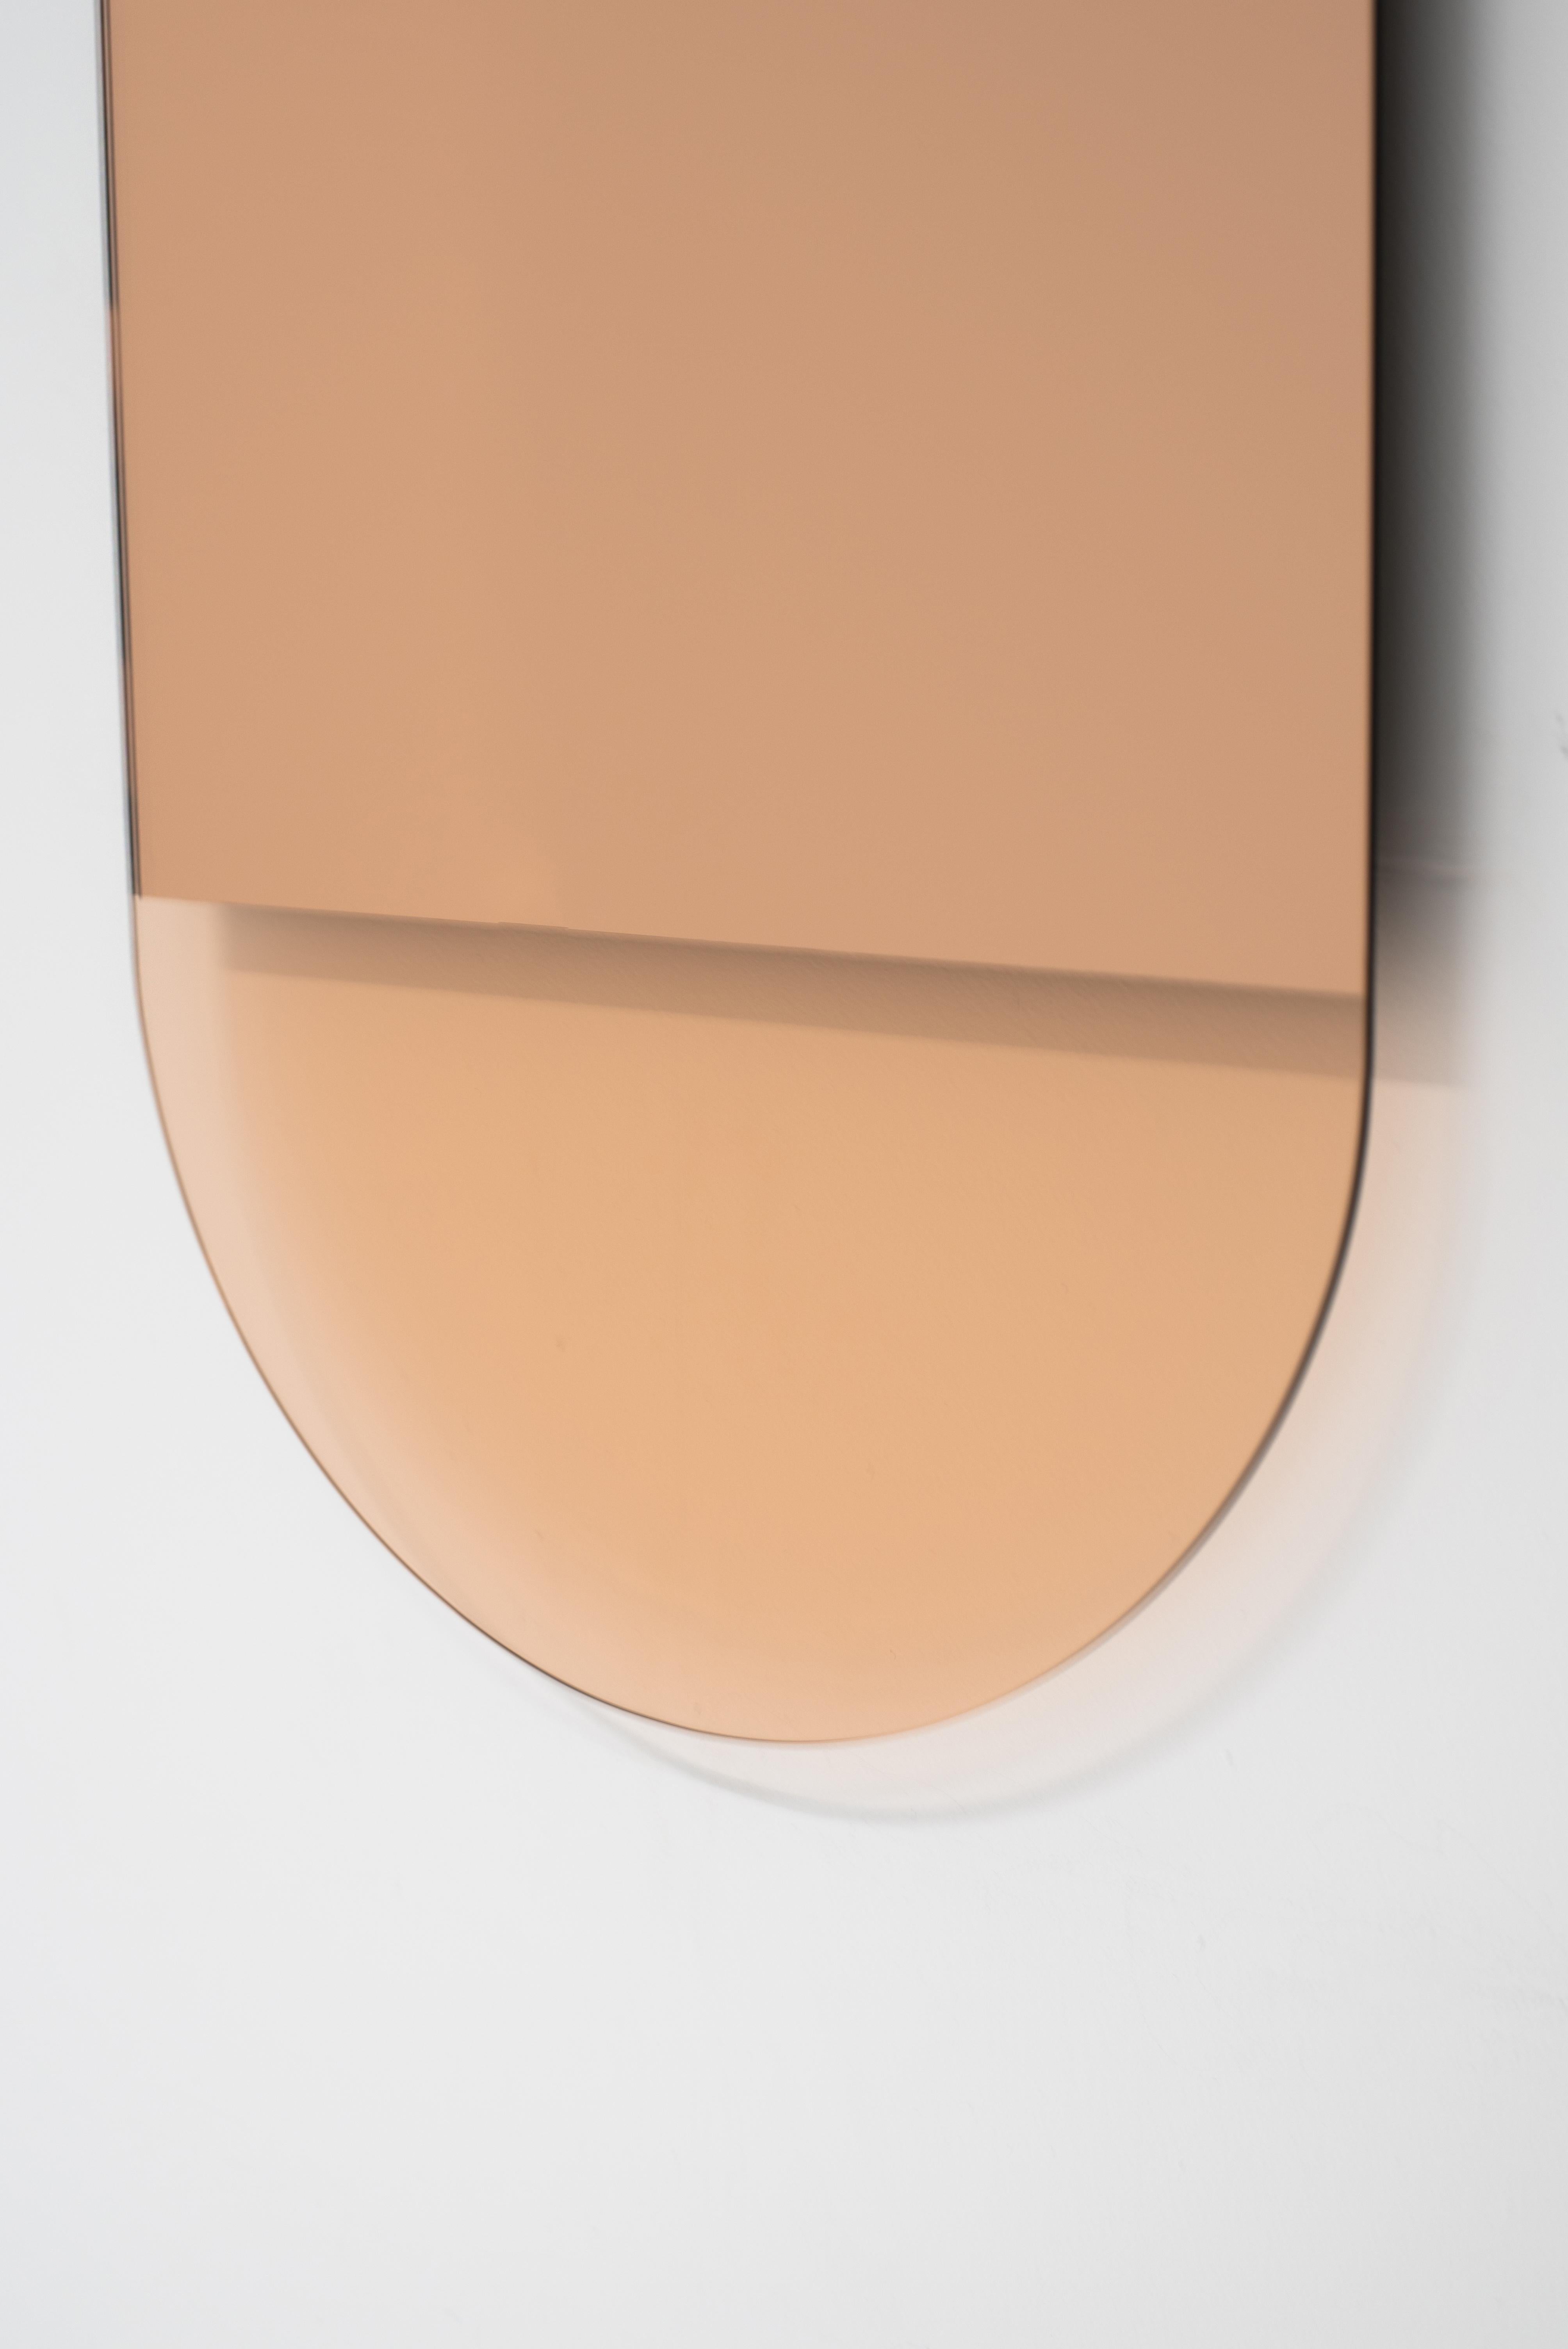 The IDA No. 3 mirror by Ben and Aja Blanc, pairs a Minimalist form with mirror removal to create formal and tonal shifts in this vertical mirror. The warm rose gold colors come from peach mirror and glass creating piece that is both stunning and